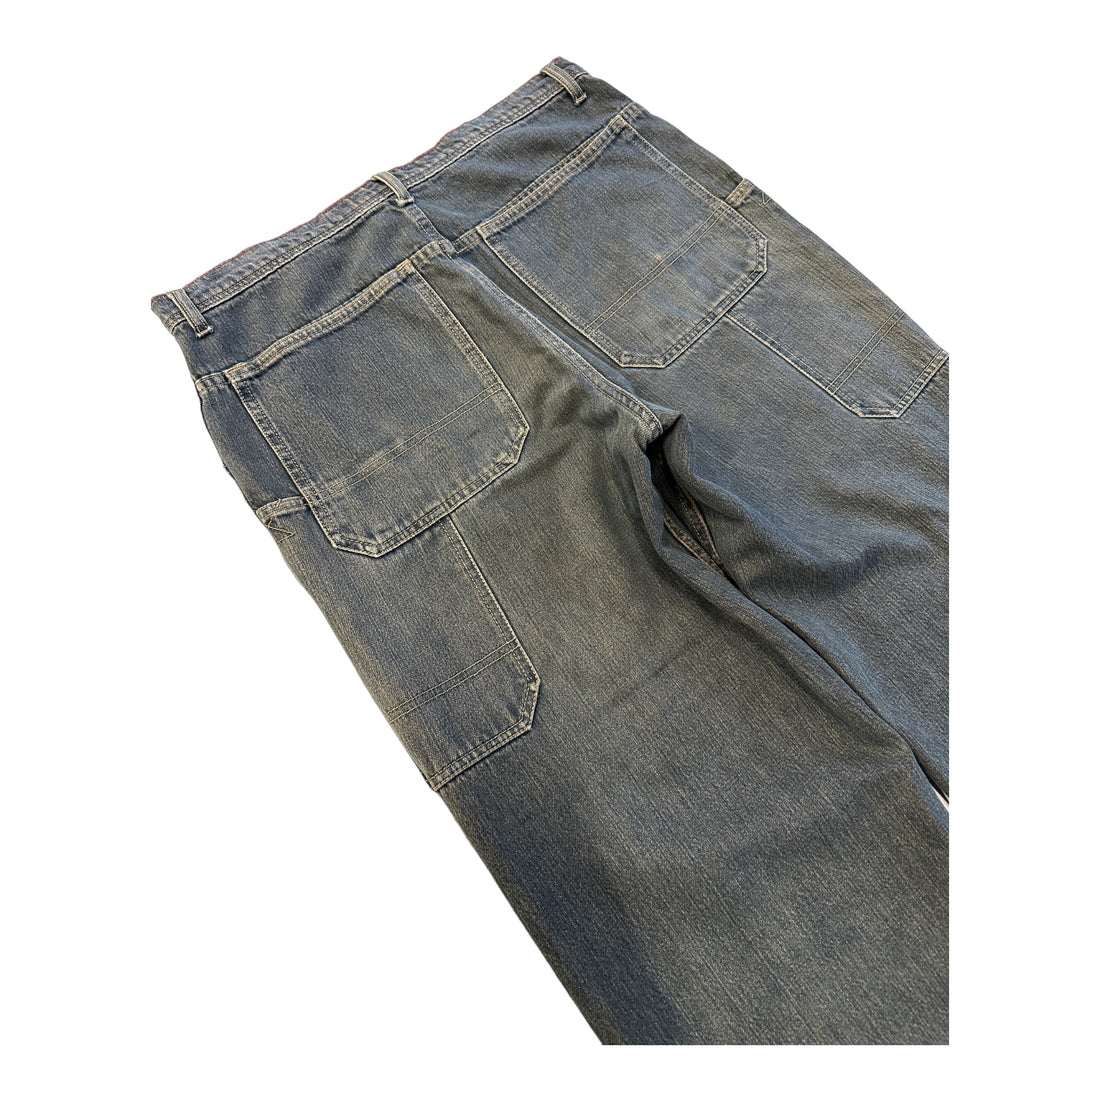 JNCO FADED BAGGY JEANS BLUE 36x30 - 2000s